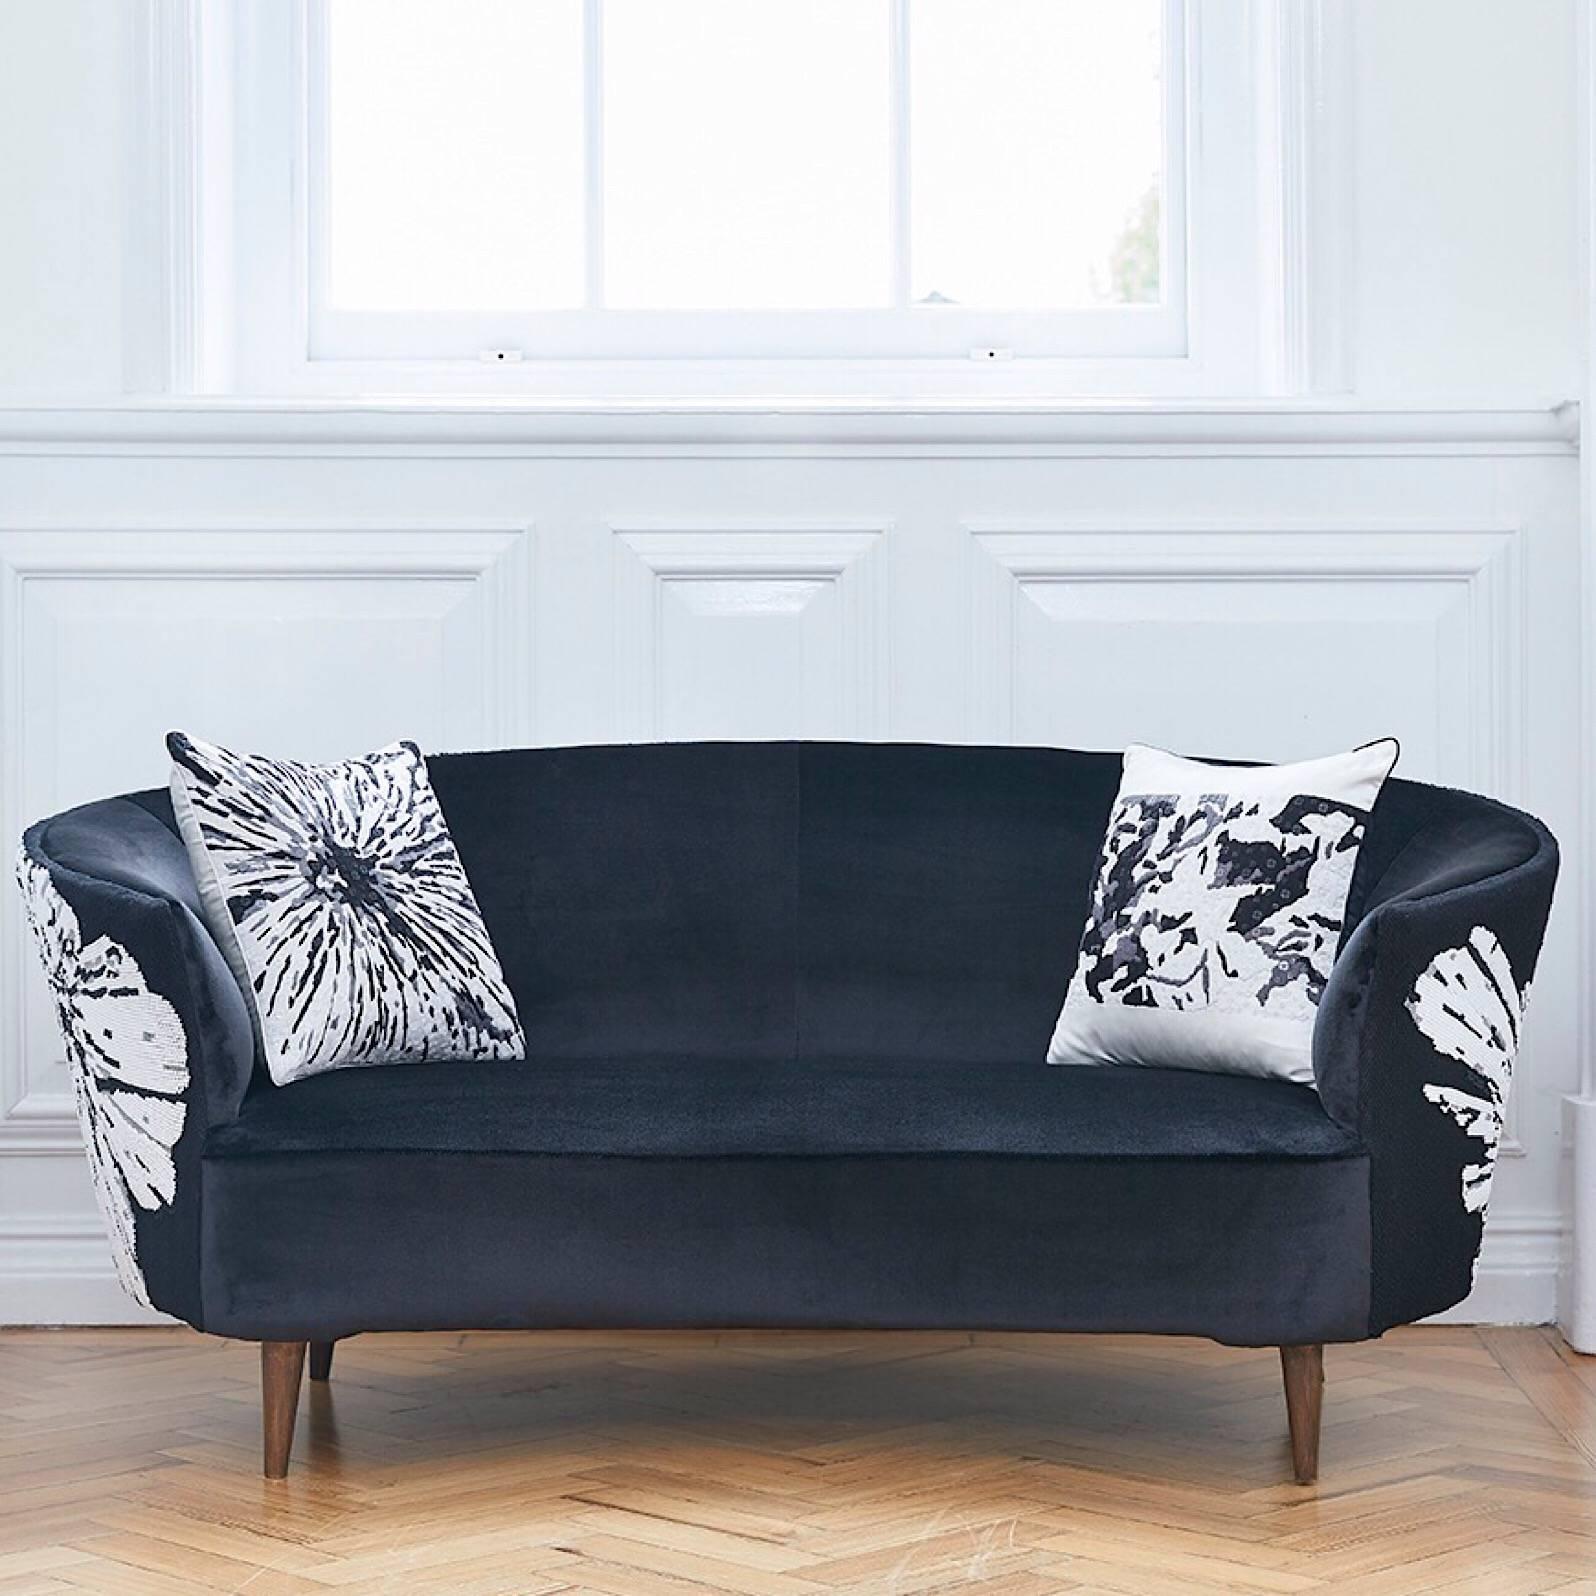 British Handcrafted Midcentury Curved Sofa with Hand Embroidered Back Black and White For Sale